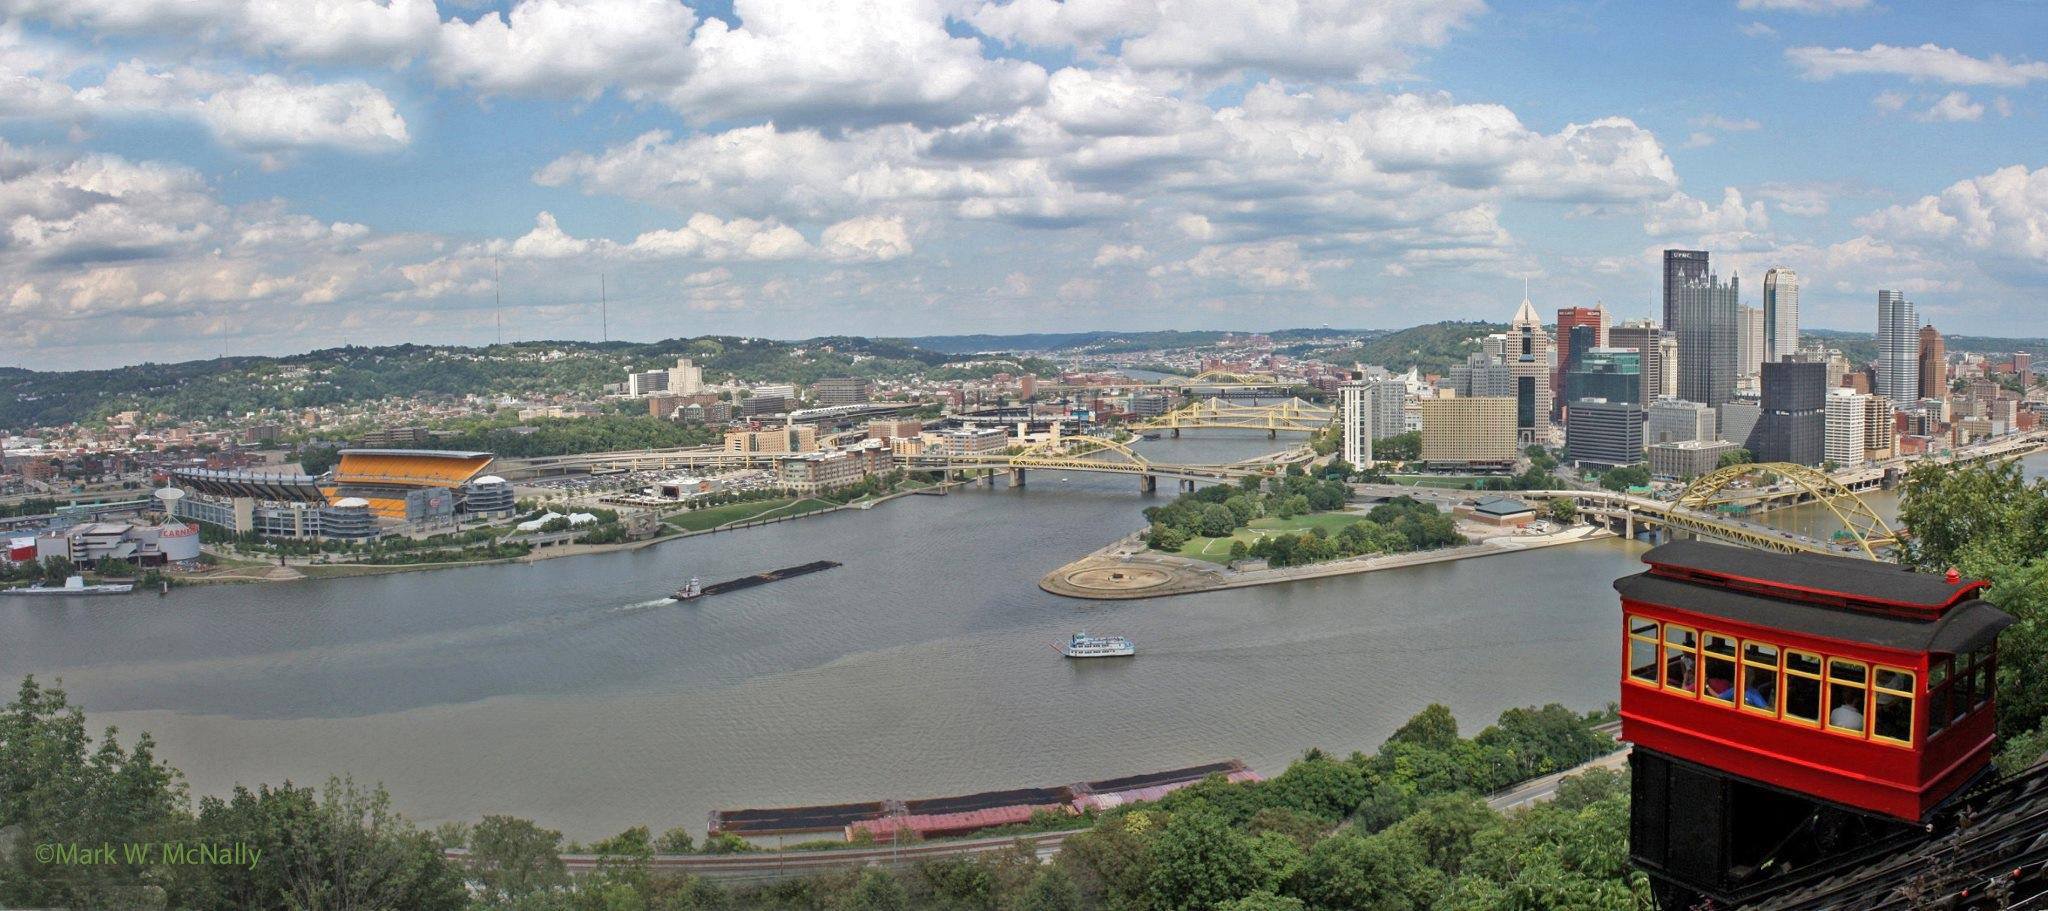 Panorama of the view from the Duquesne Incline